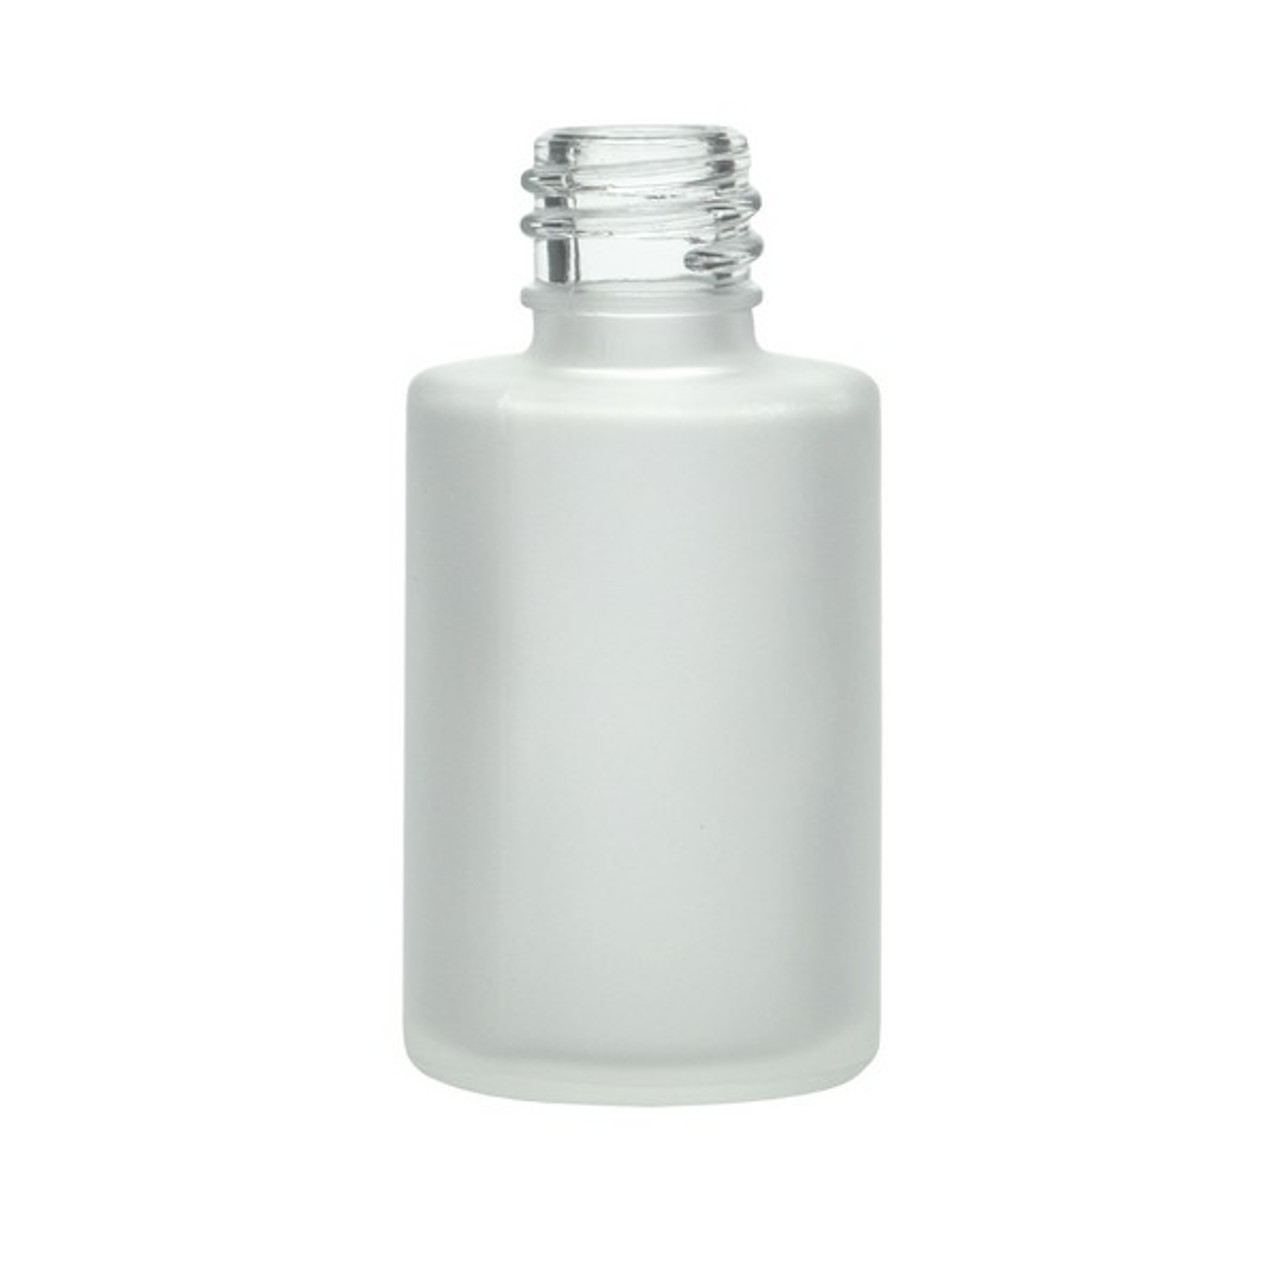 Download 1 Oz Frosted Glass Bottles Cap Not Included Berlin